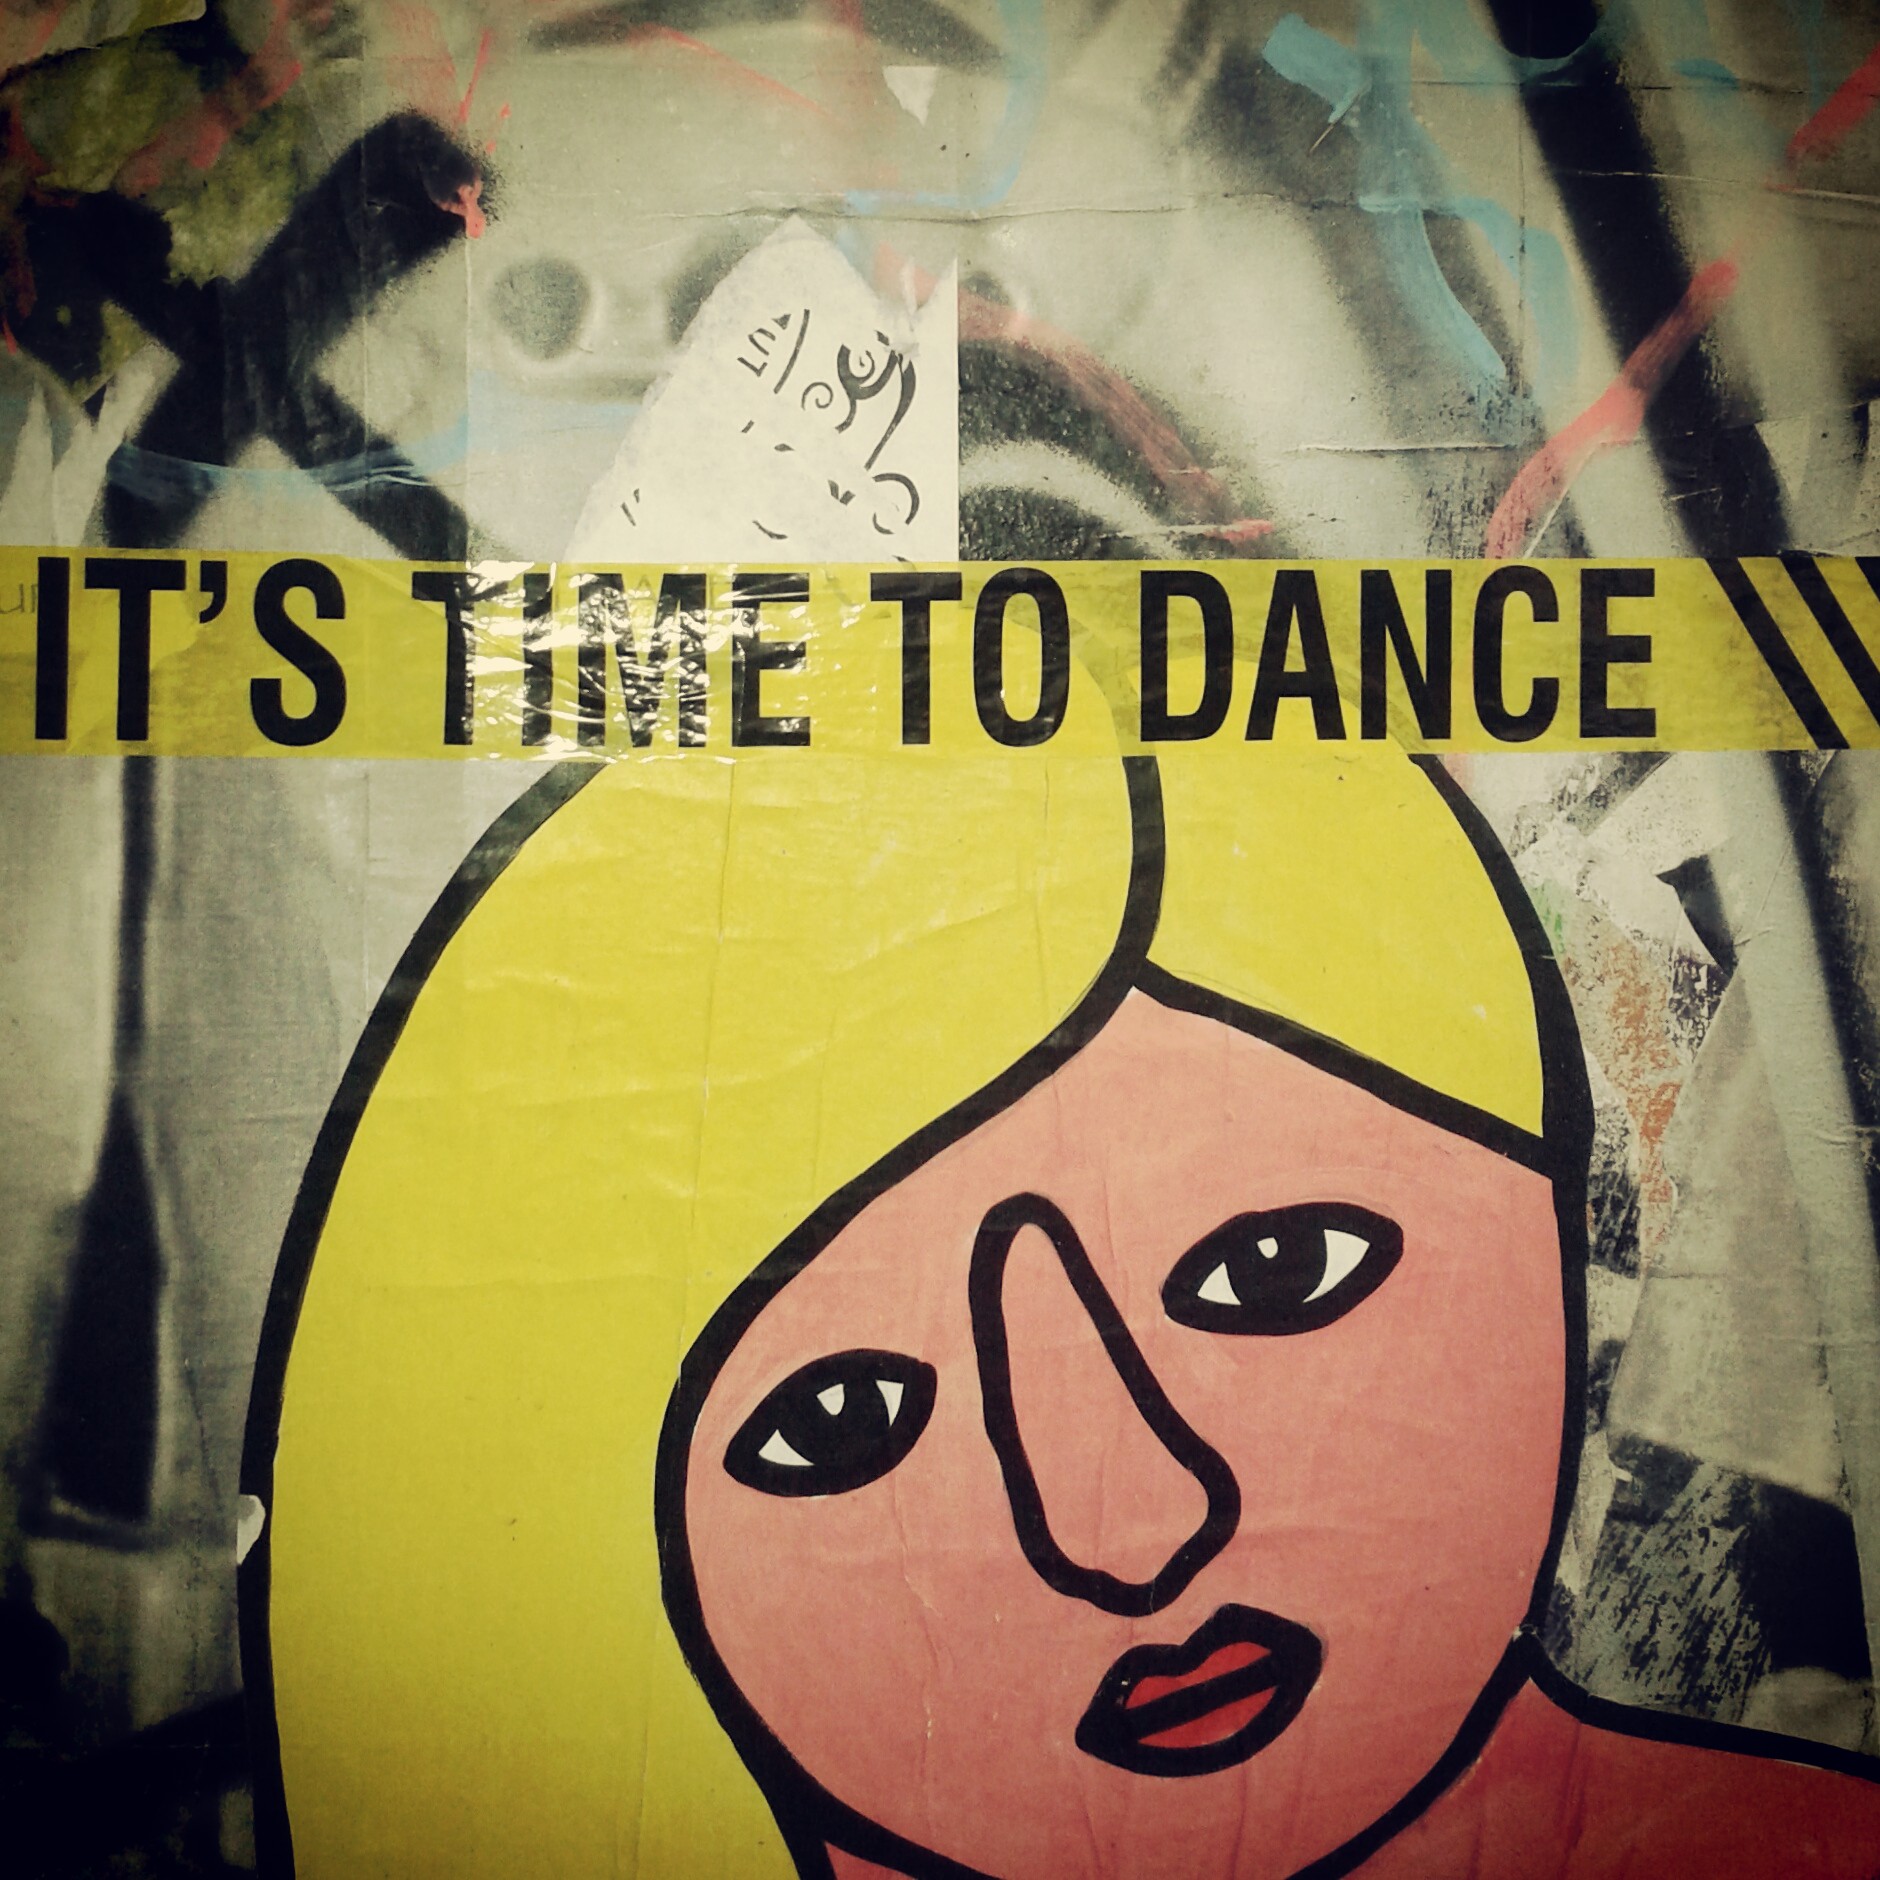 It's time to dance!